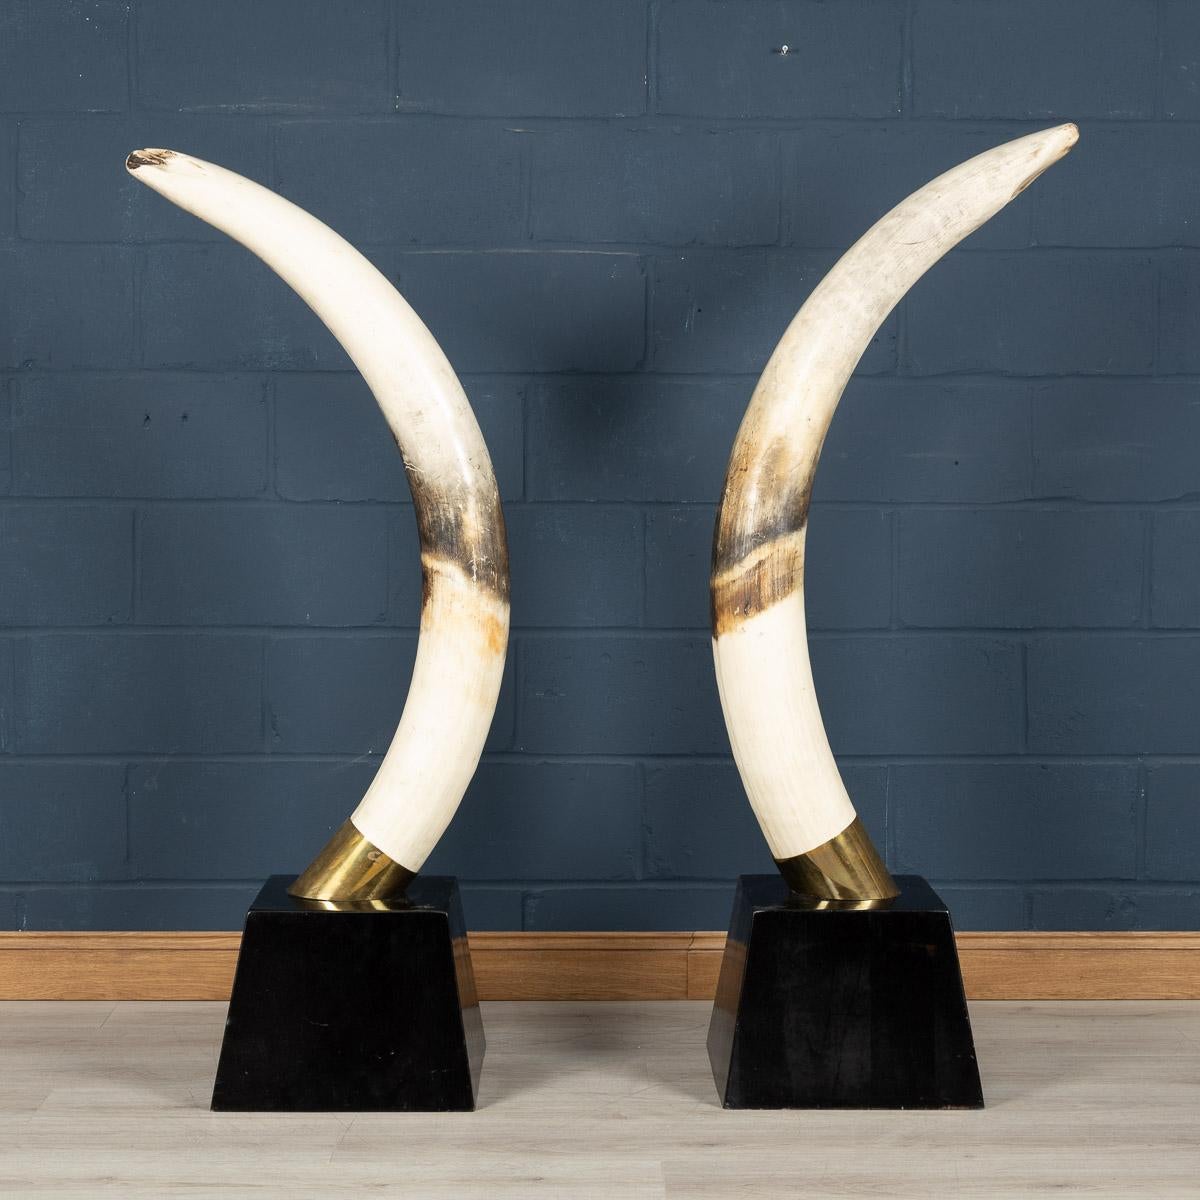 English Pair of Massive 21st Century Resin Tusks by Anthony Redmile London